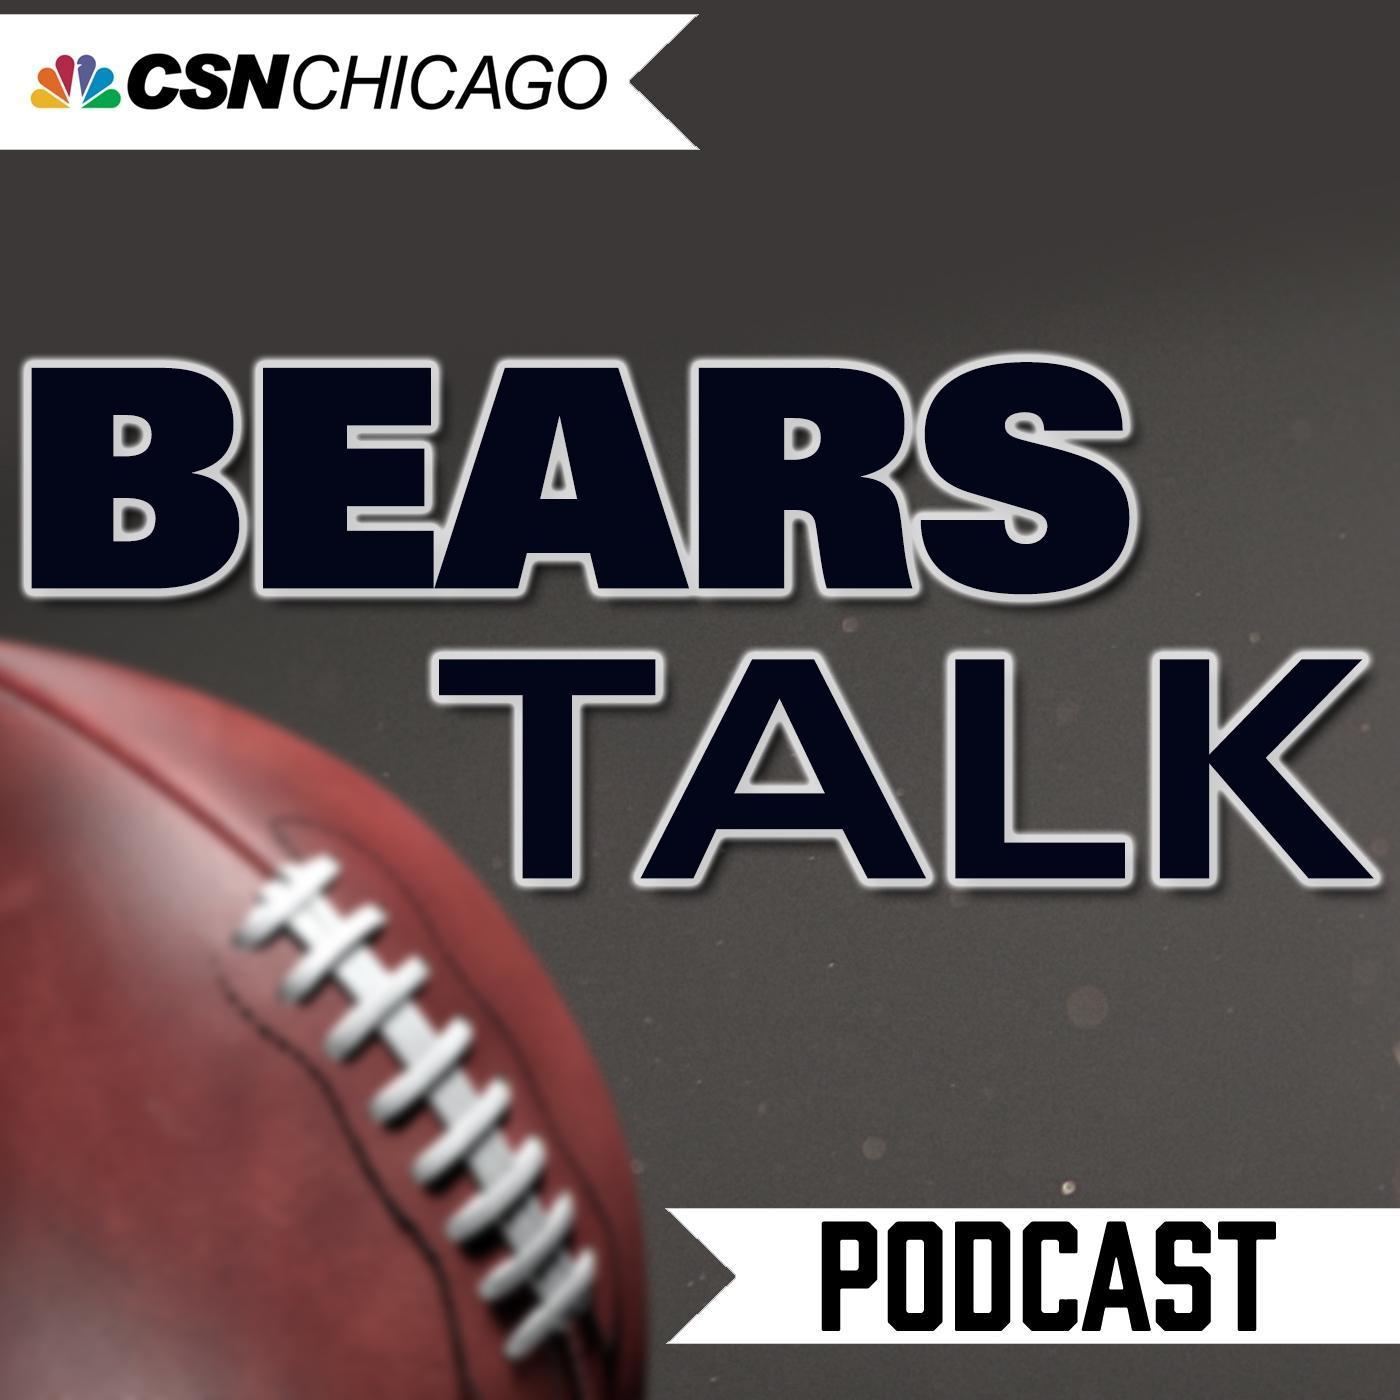 Ep. 46: Talking Kevin White with WR coach Zach Azzanni